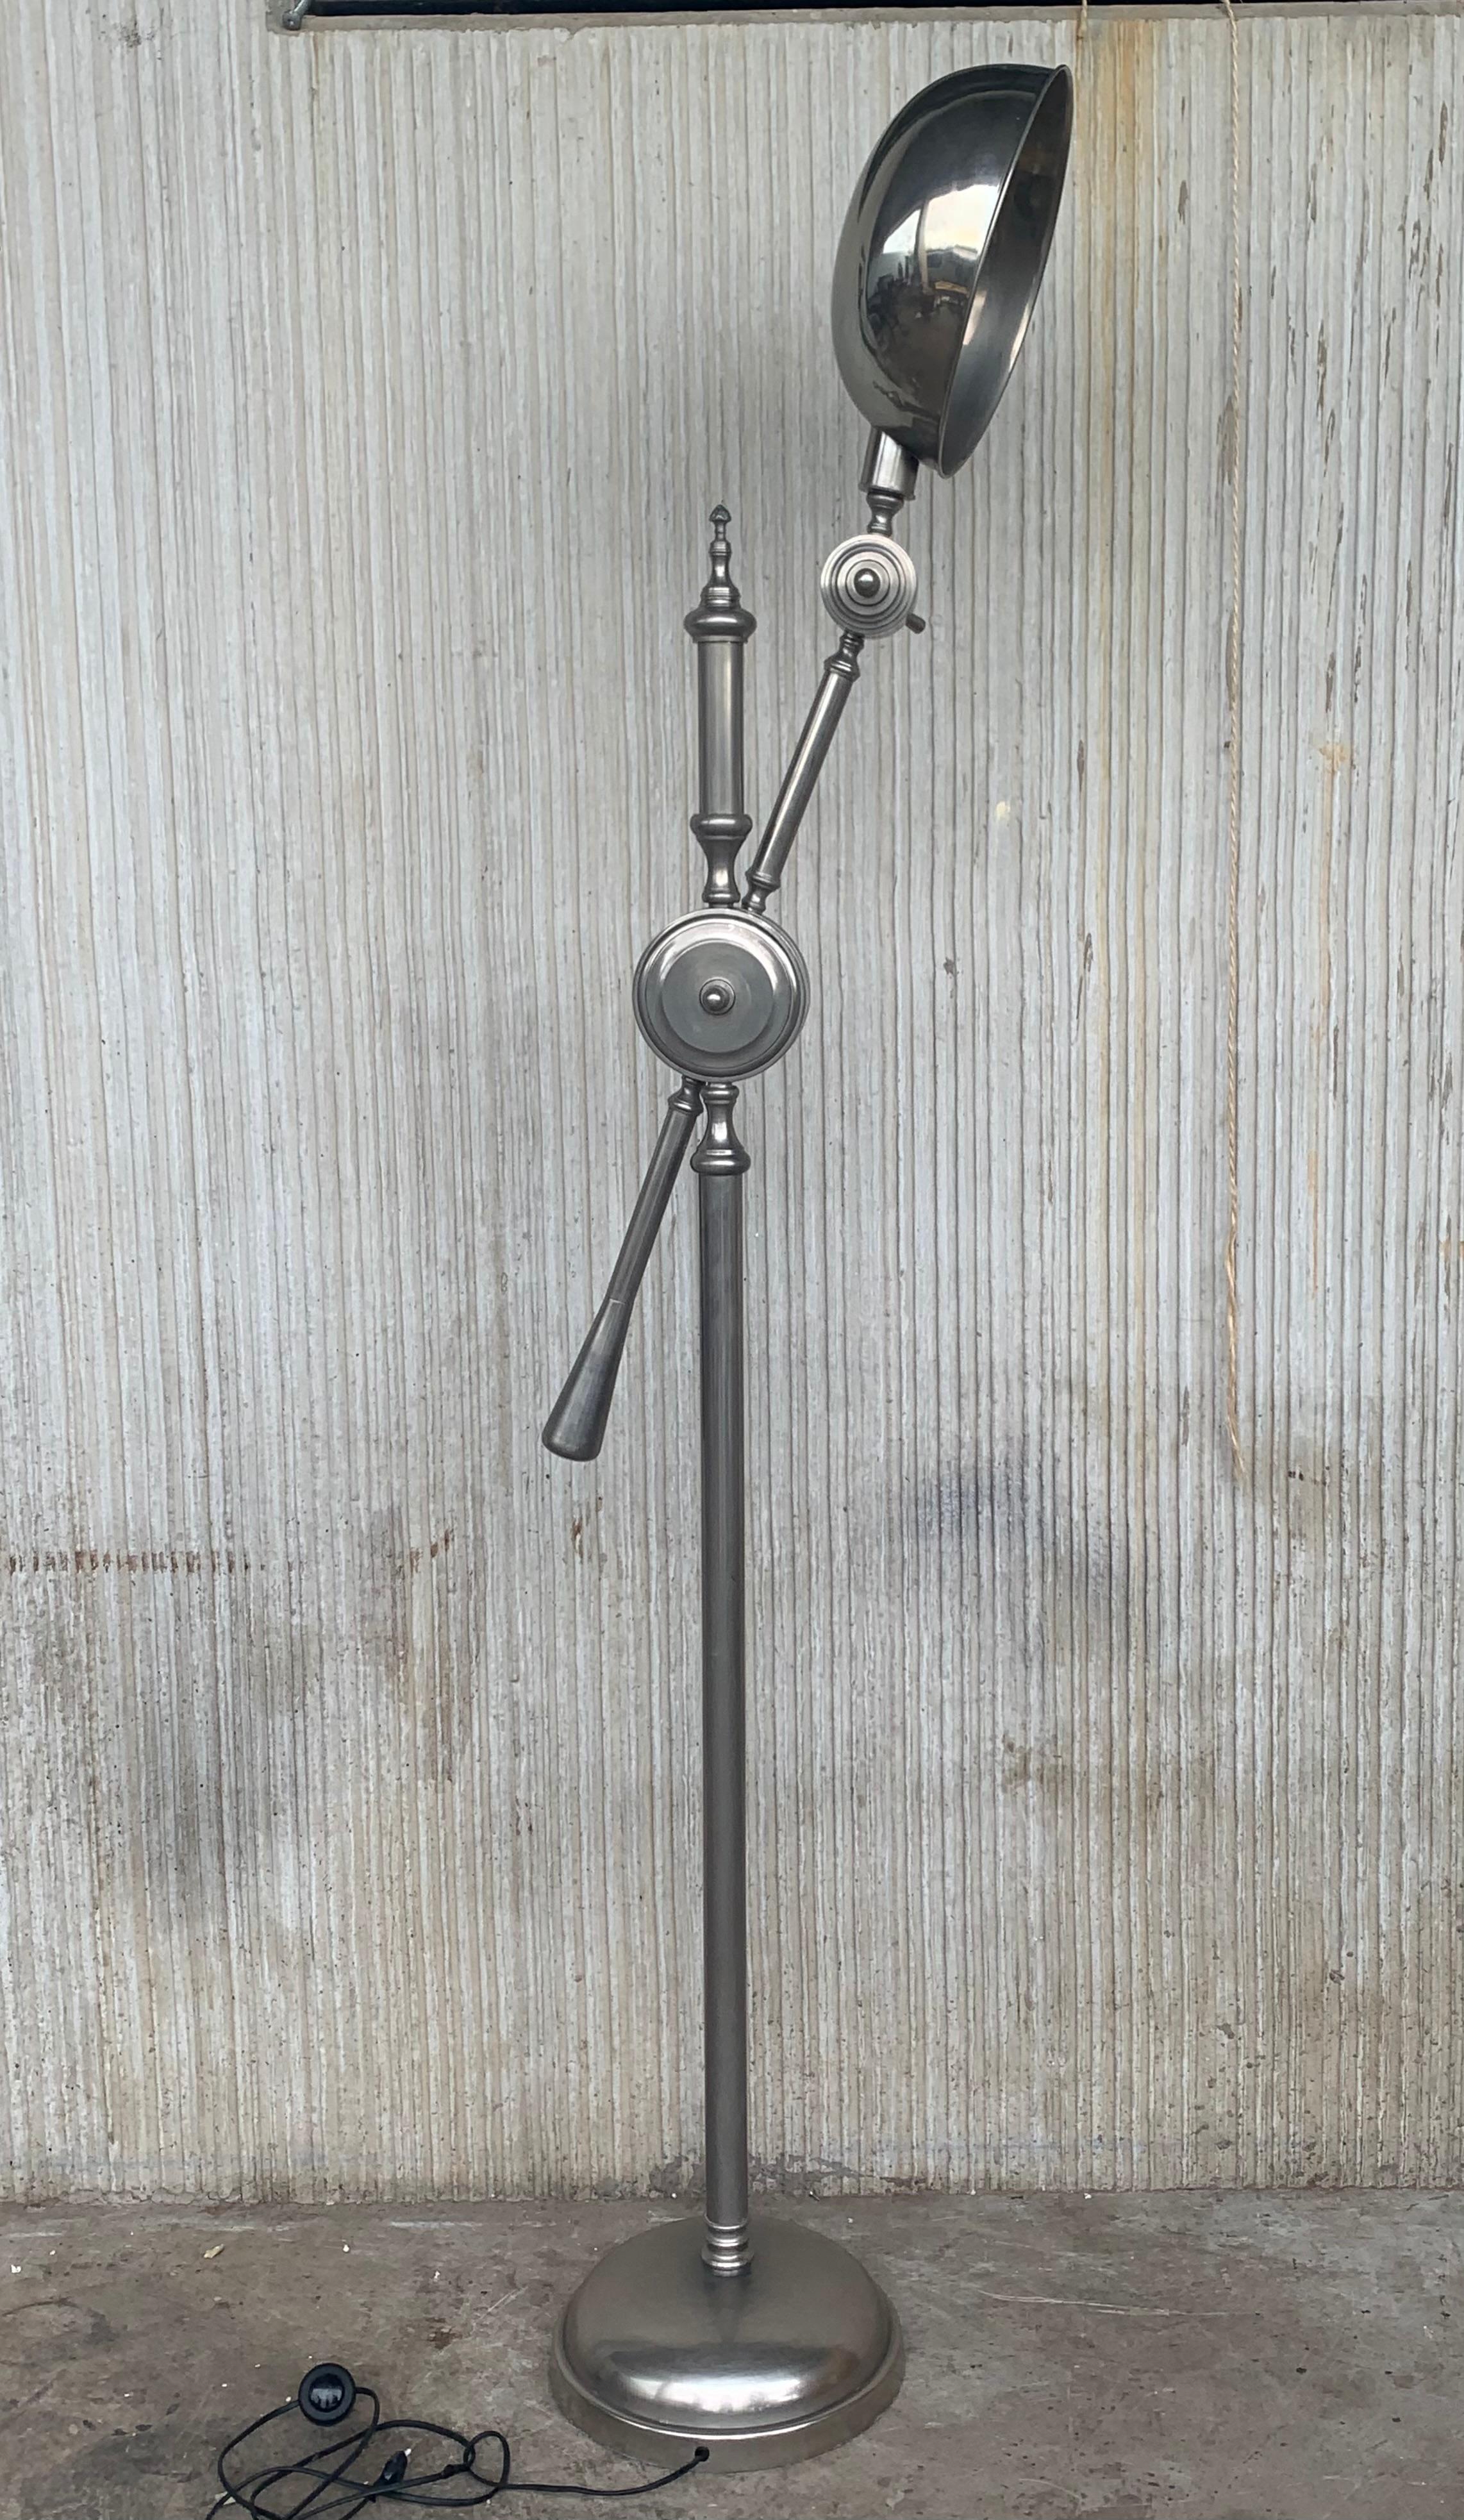 A substantial midcentury industrial lamp. An incredible piece with solid cast iron base, long chrome arm and fittings with a large polished aluminum head. This lamp is fully adjustable in all directions.
Incredible hardware to adjust the different